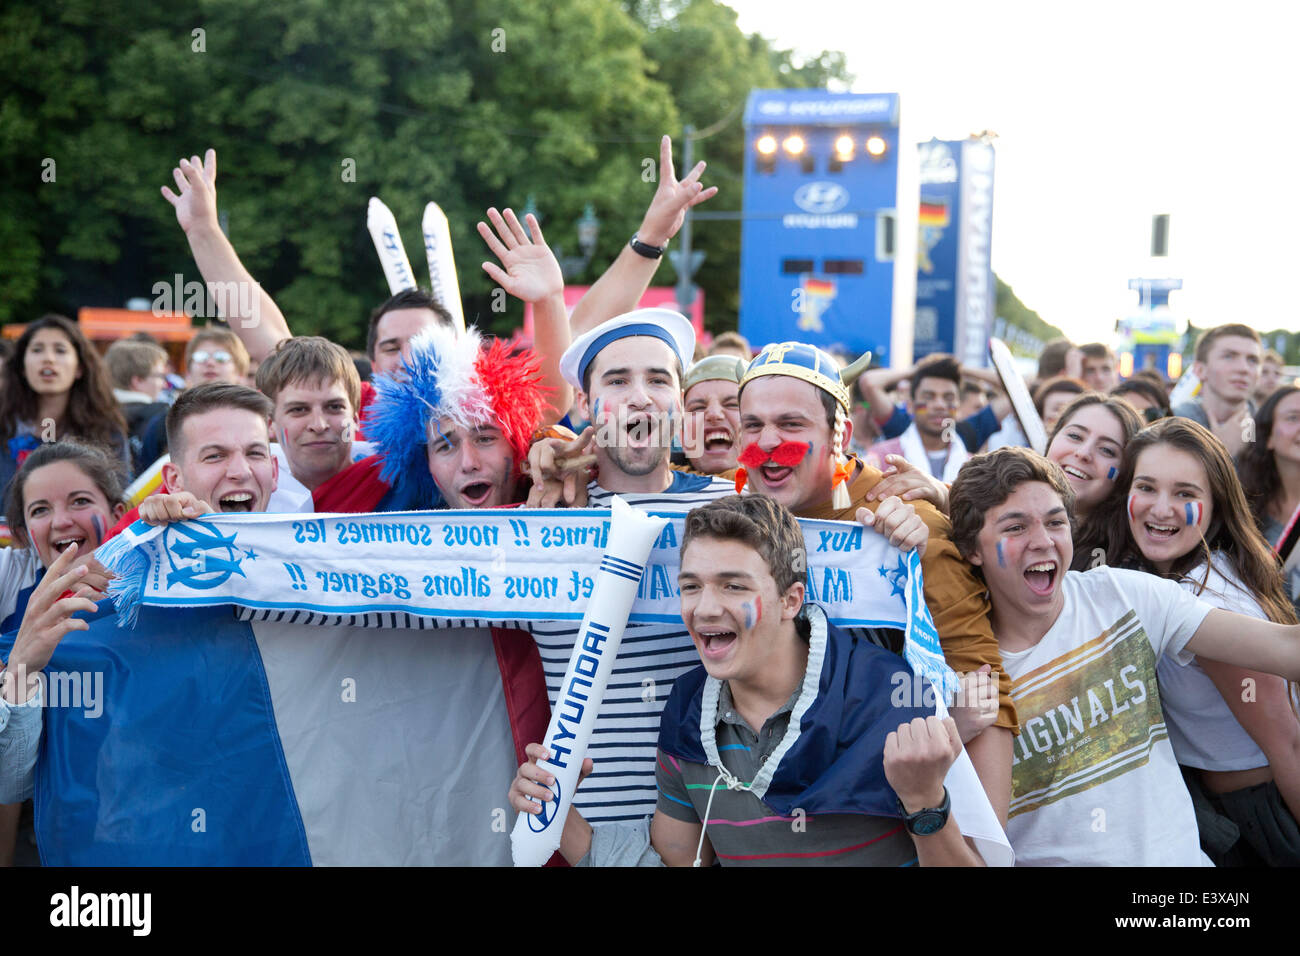 Fans cheer after France wins in the Brazil 2014 World Cup match against Nigeria at a Public Viewing event at the Brandeburg Gate in Berlin, Germany, 30 June 2014. Photo: Joerg Carstensen Stock Photo